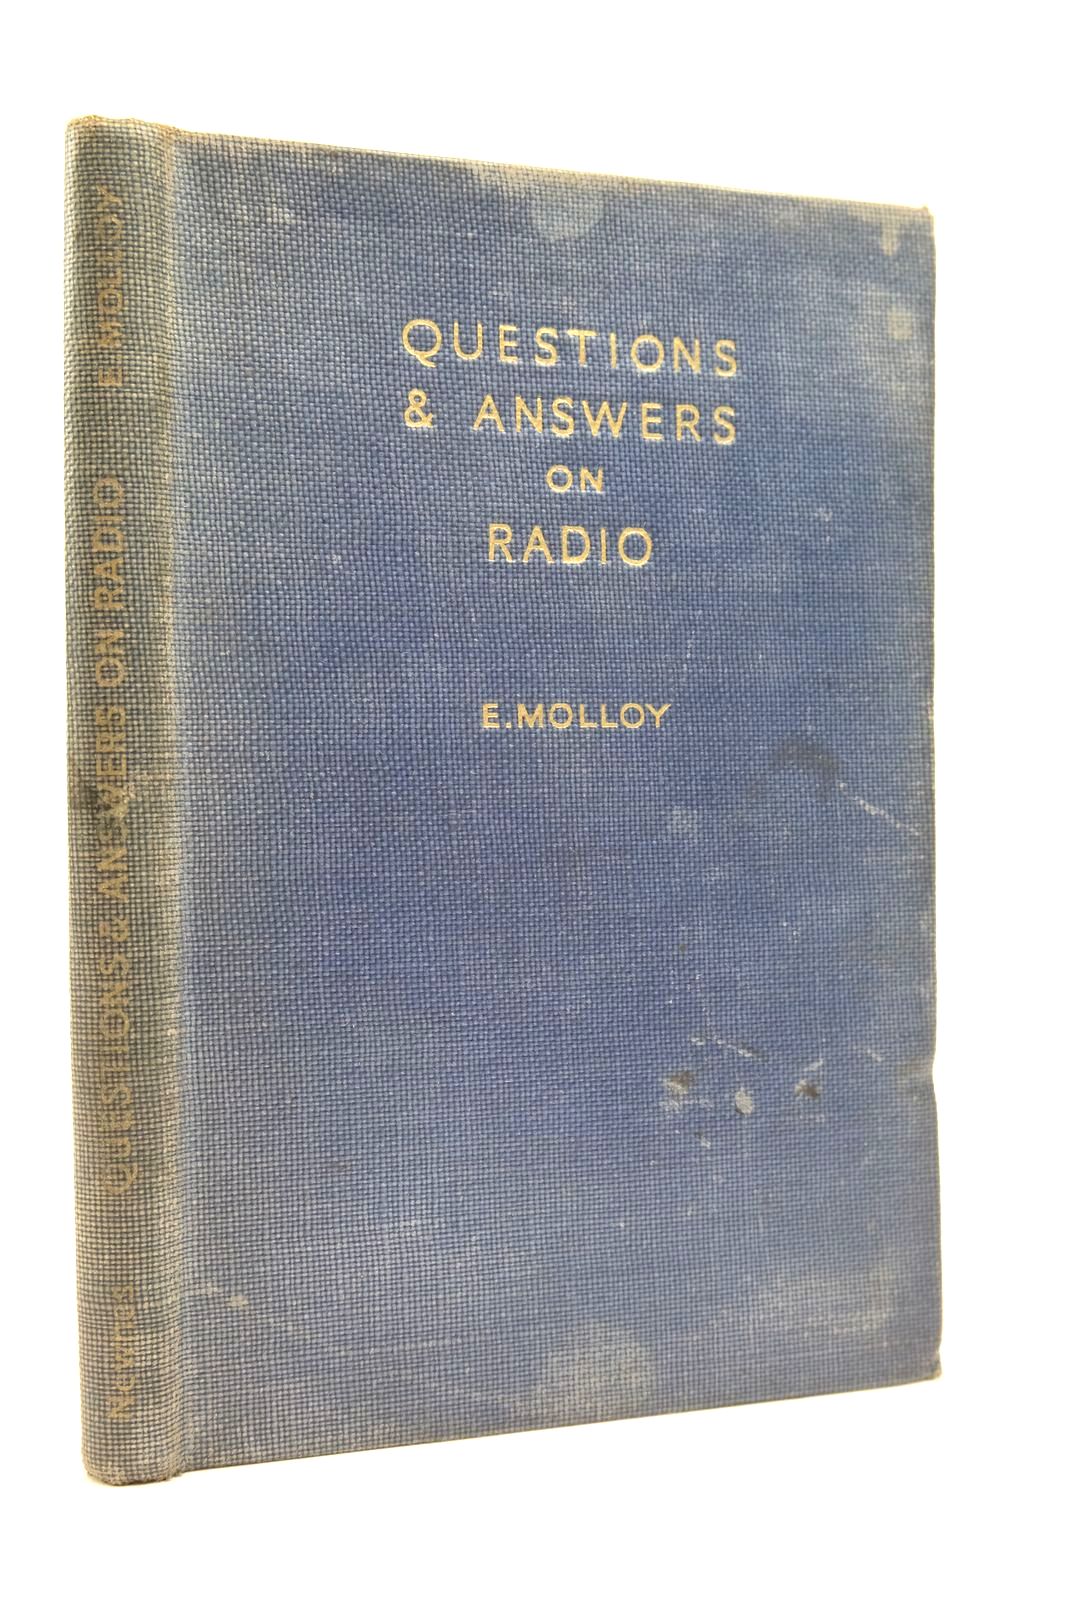 Photo of QUESTIONS AND ANSWERS ON RADIO- Stock Number: 2140308